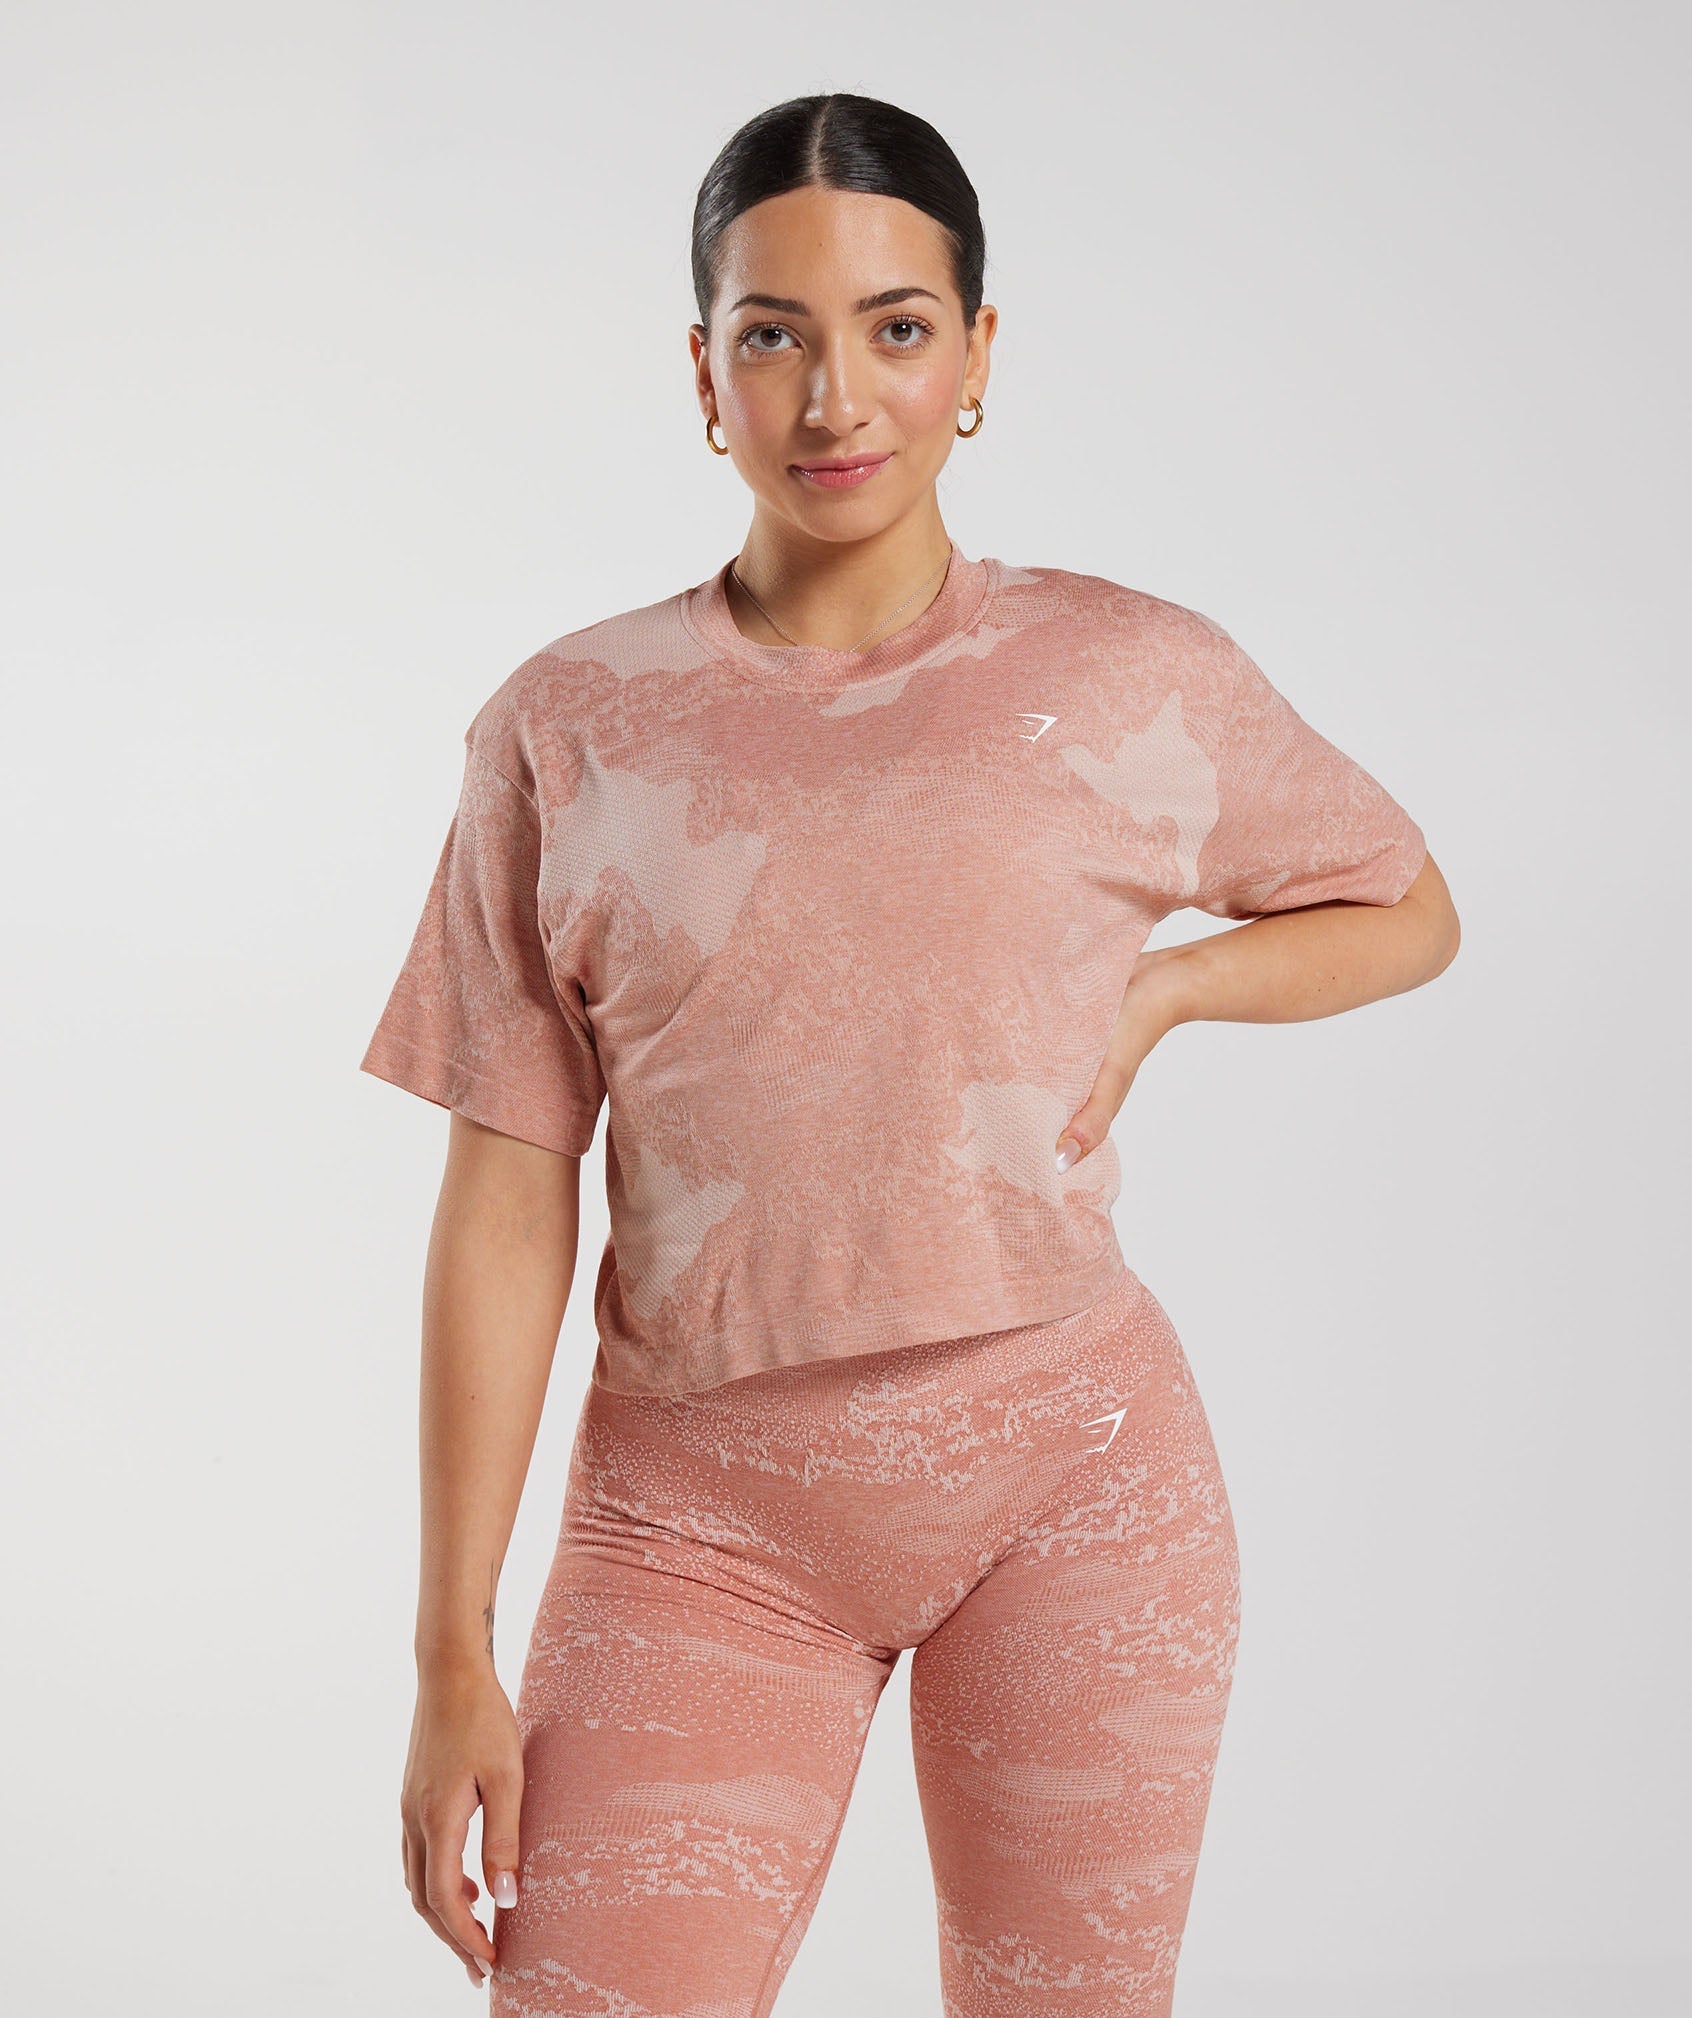 Adapt Camo Seamless Crop Top in Misty Pink/Hazy Pink - view 1